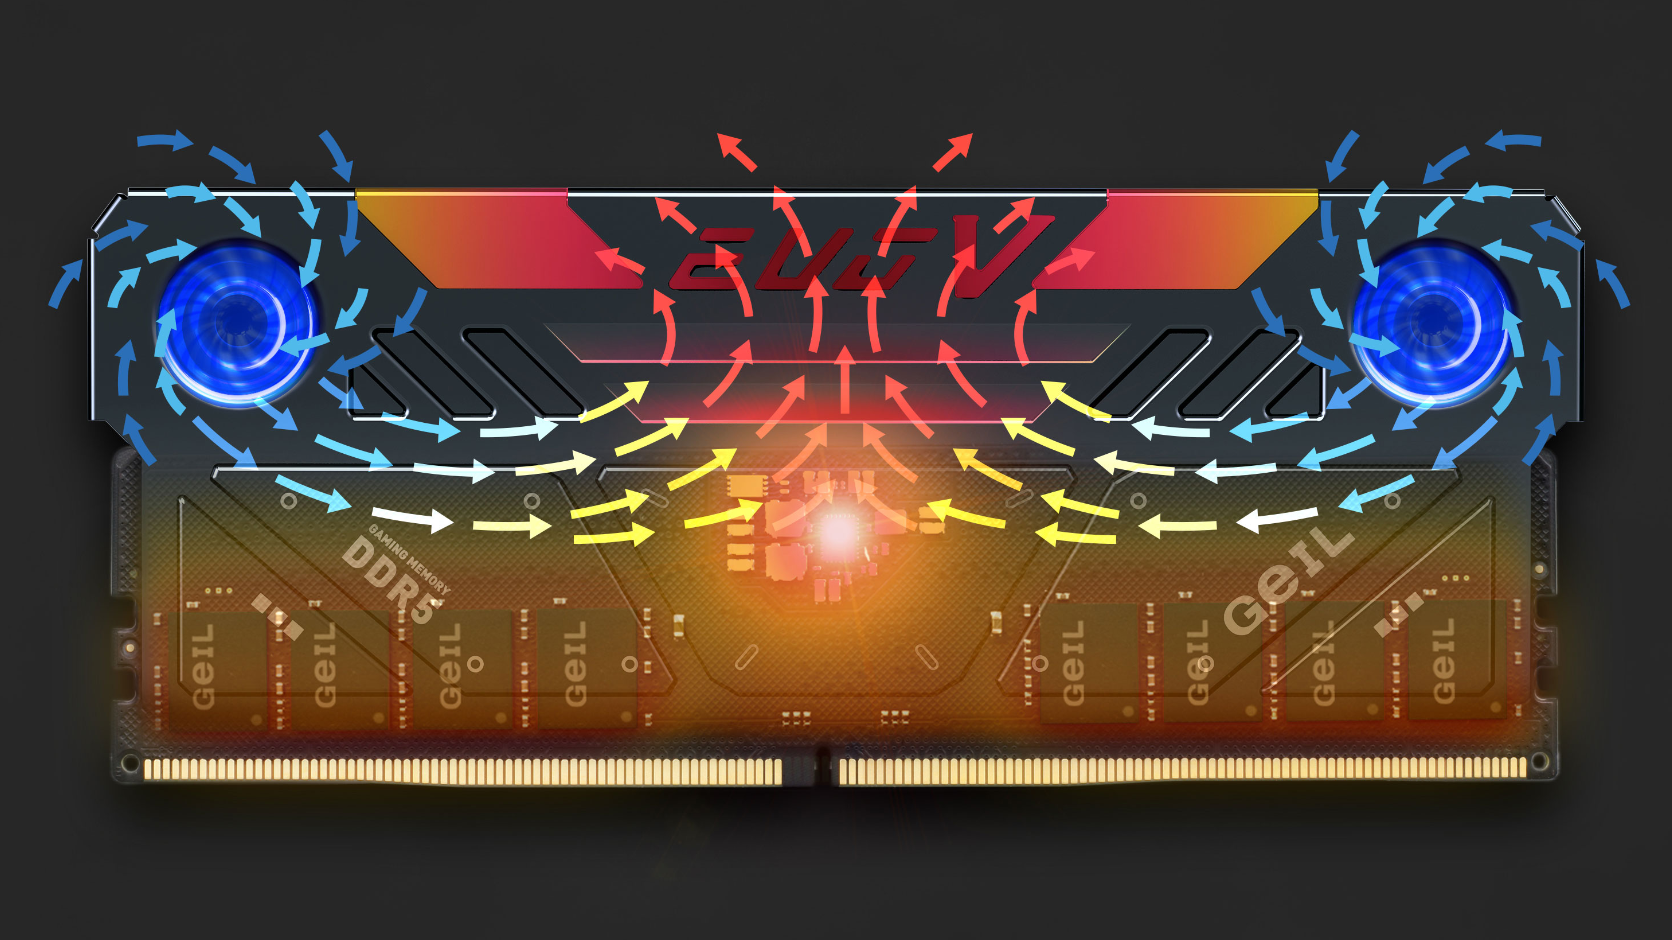 Geil Evo V DDR5 RGB memory module schematic diagram, showing airflow from the built-in fans.